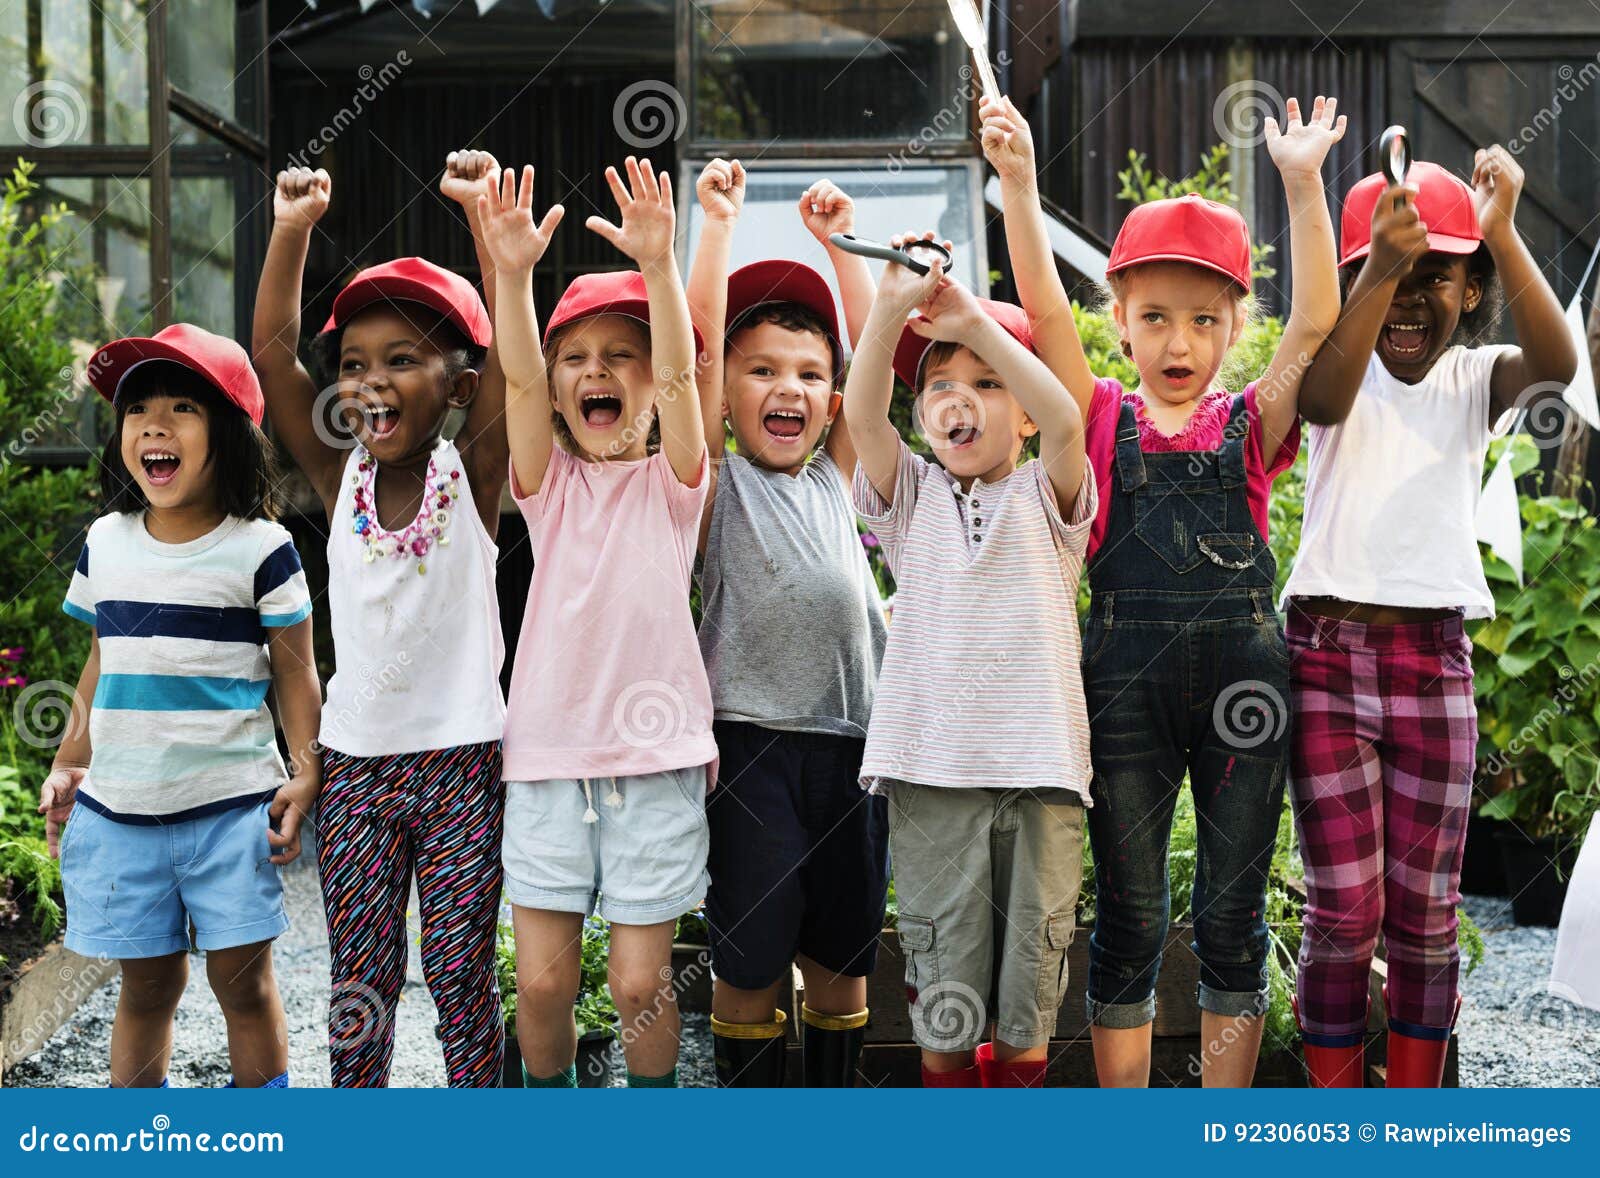 group of kids school field trips learning outdoors active smiling fun